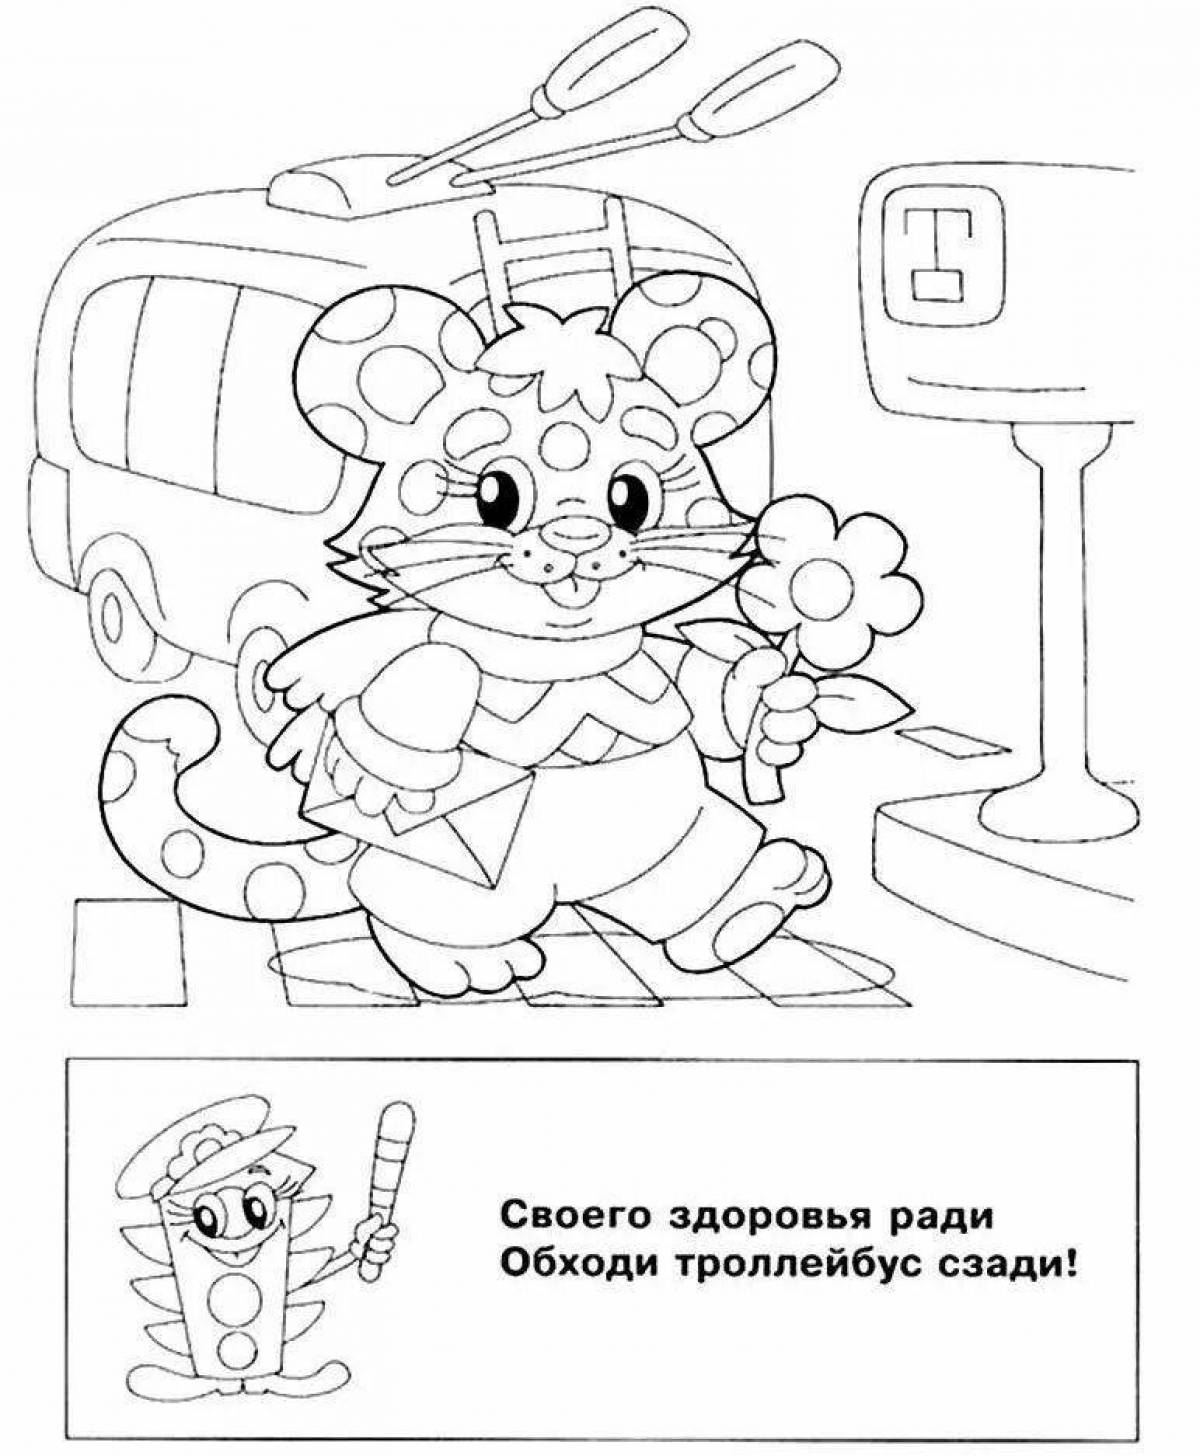 Loaded traffic coloring page